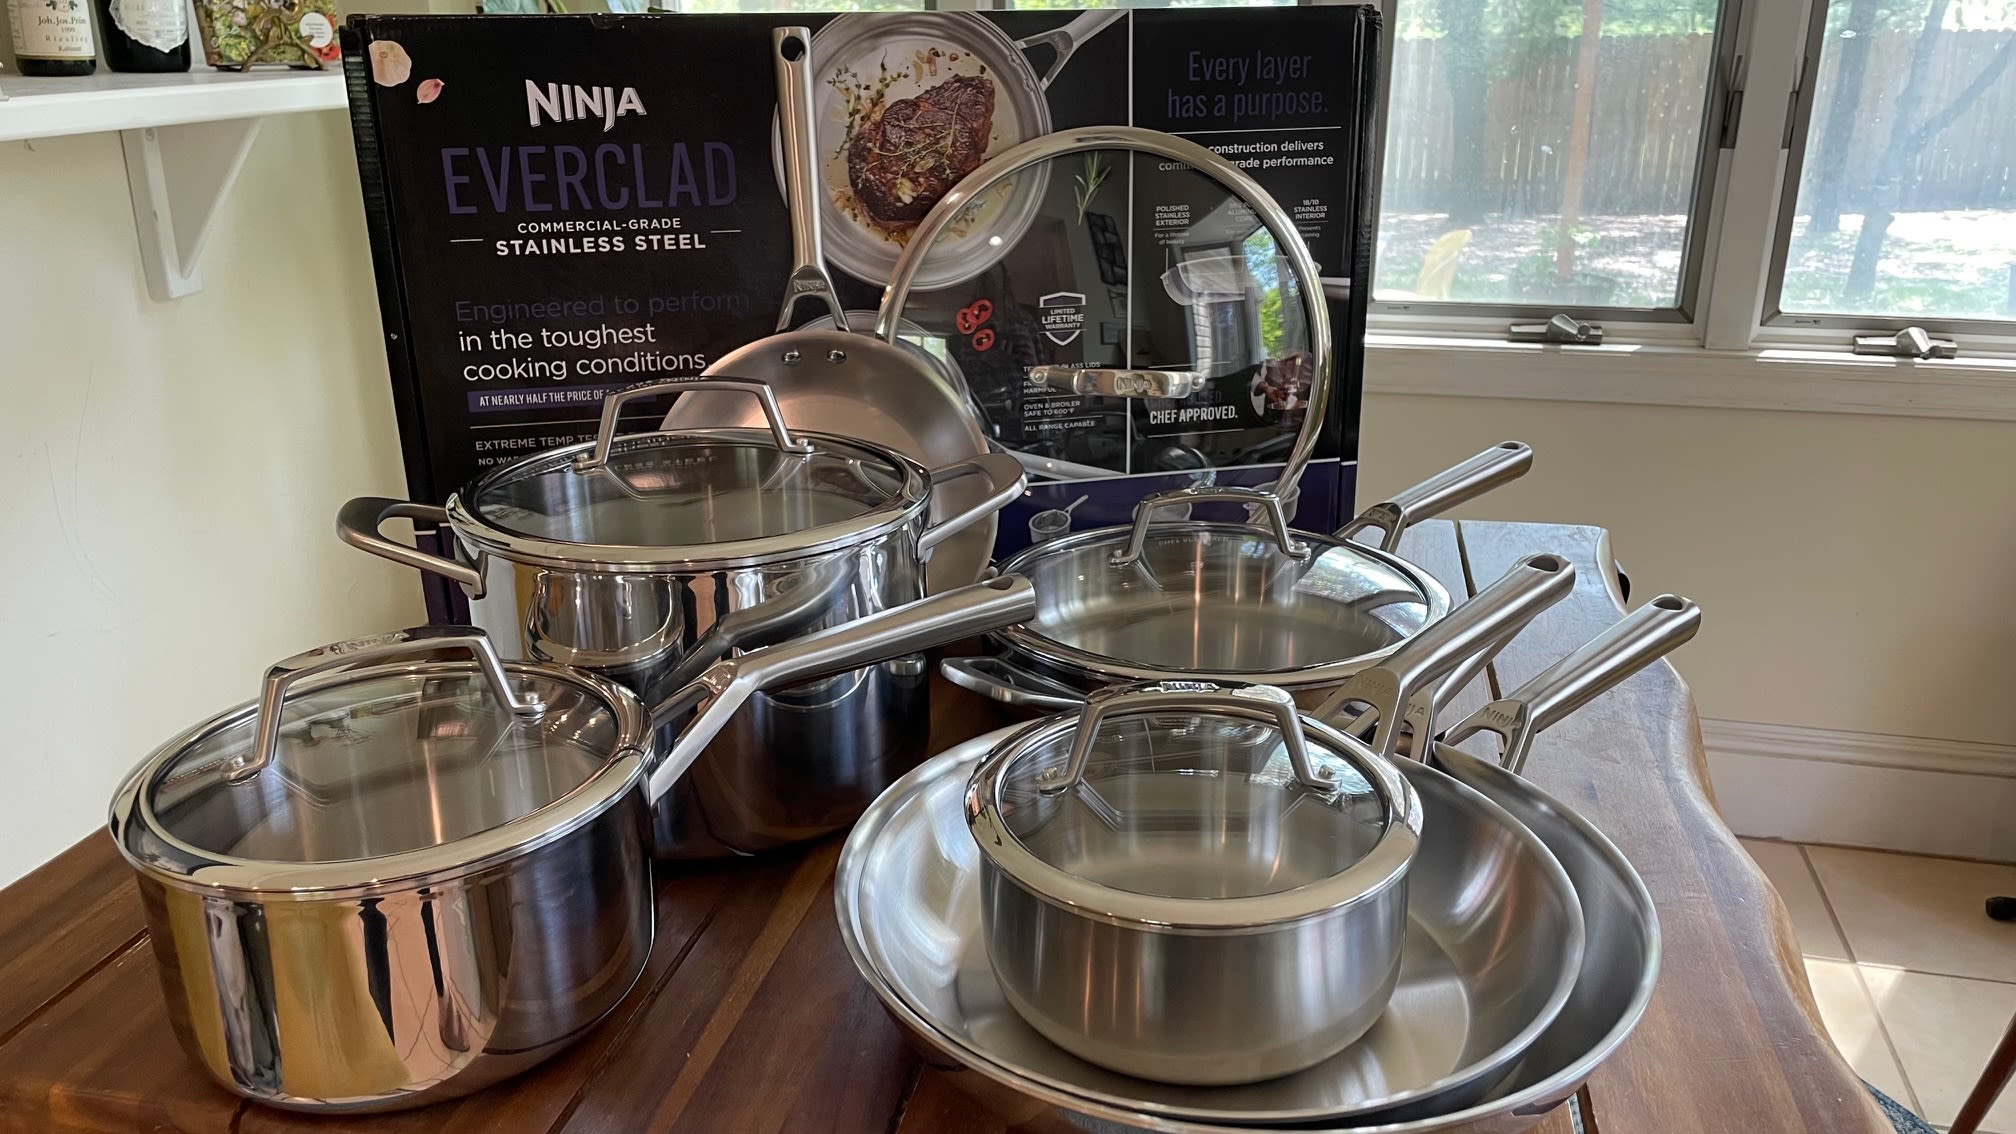 We love this stainless-steel cookware set for its top-notch performance and reasonable price tag